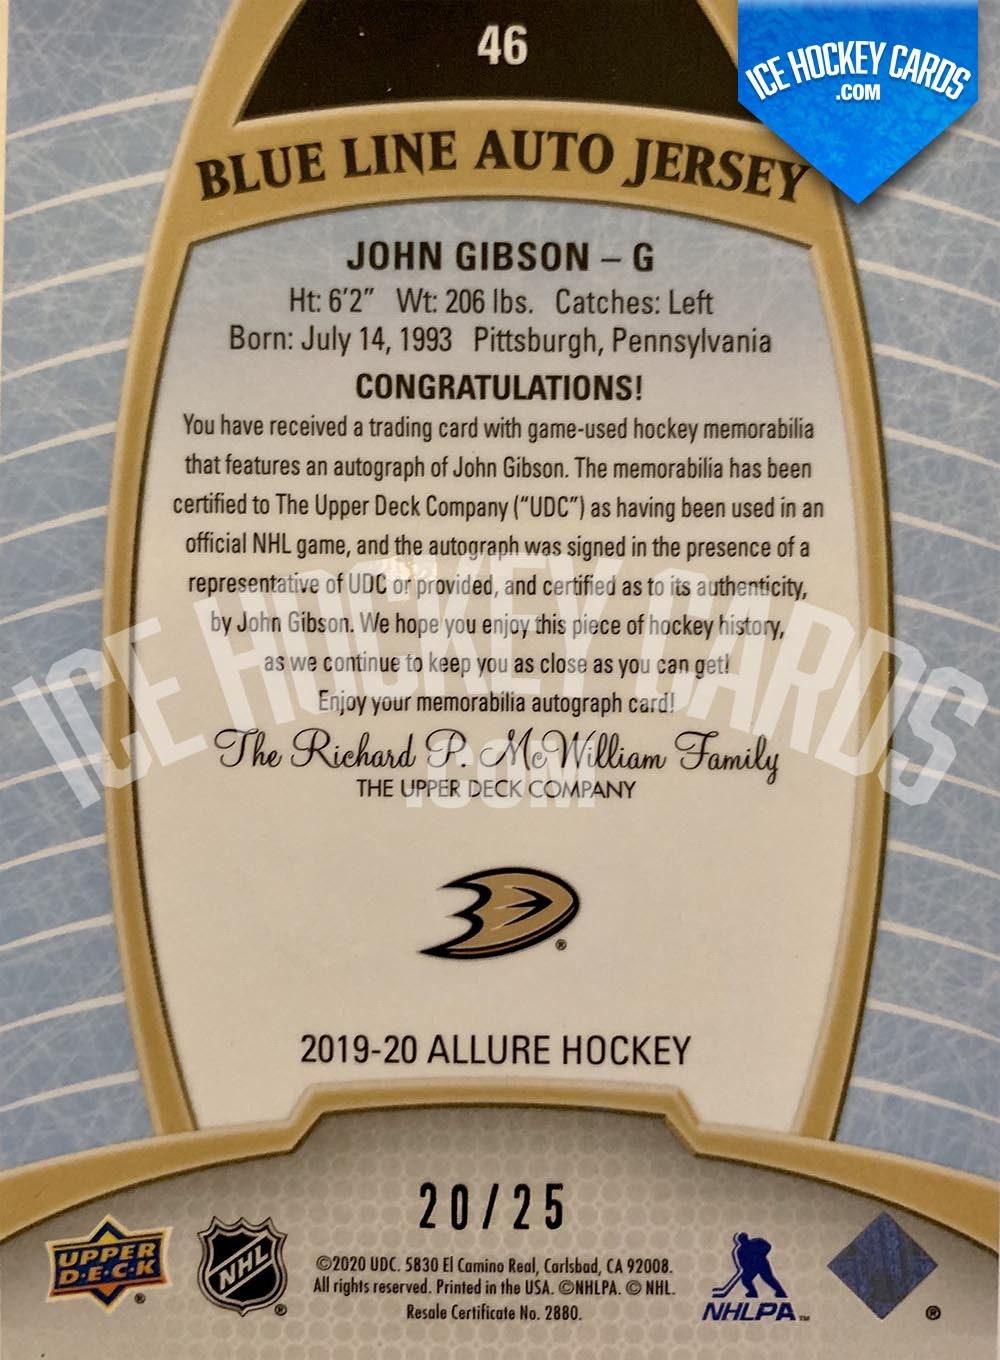 Upper Deck - Allure 2019-20 - John Gibson Blue Line Auto Jersey Card RARE # to 25 back